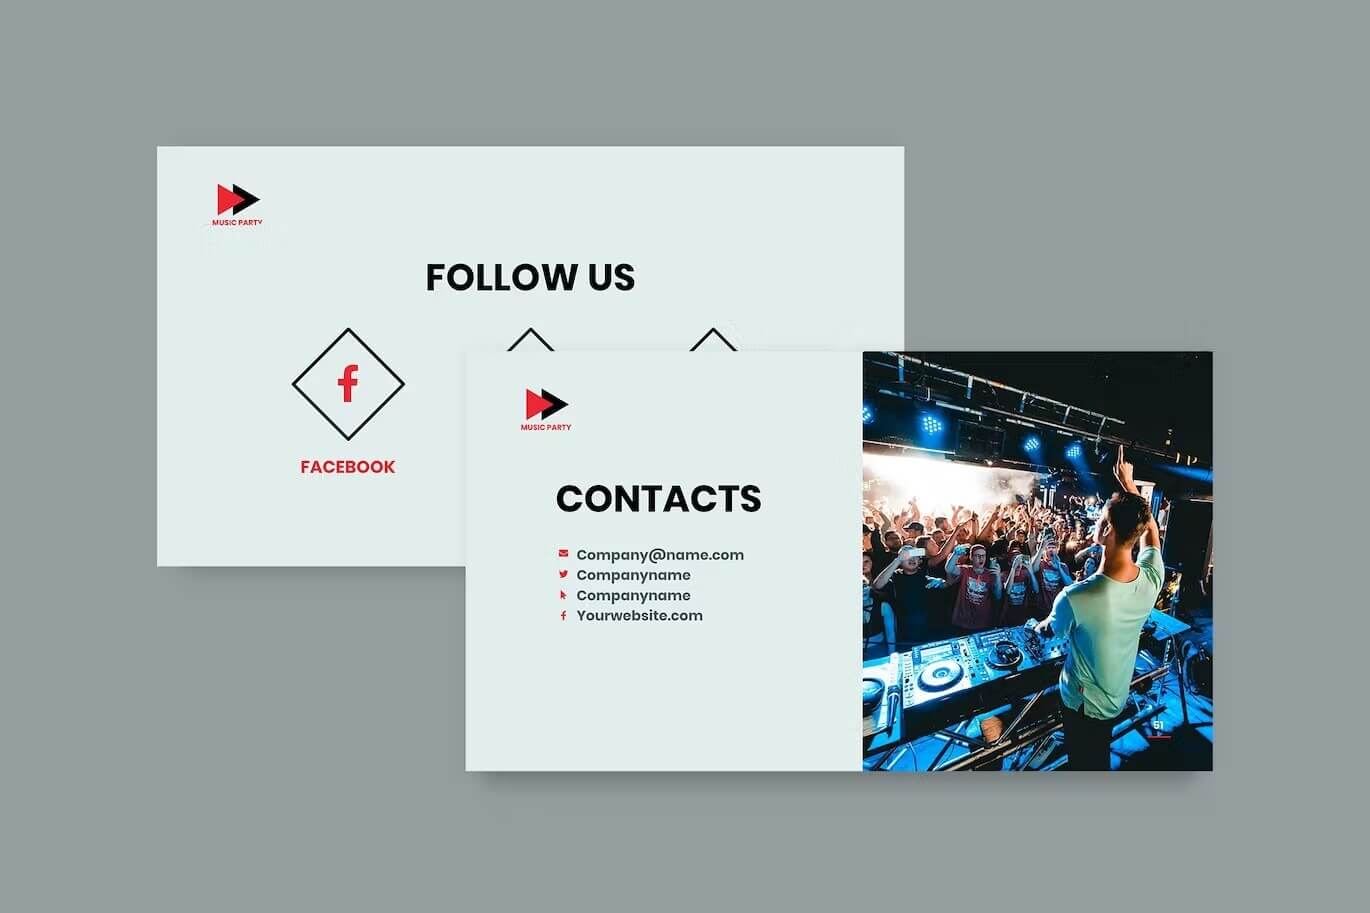 Two slides with titles "Follow us" and "Contacts".